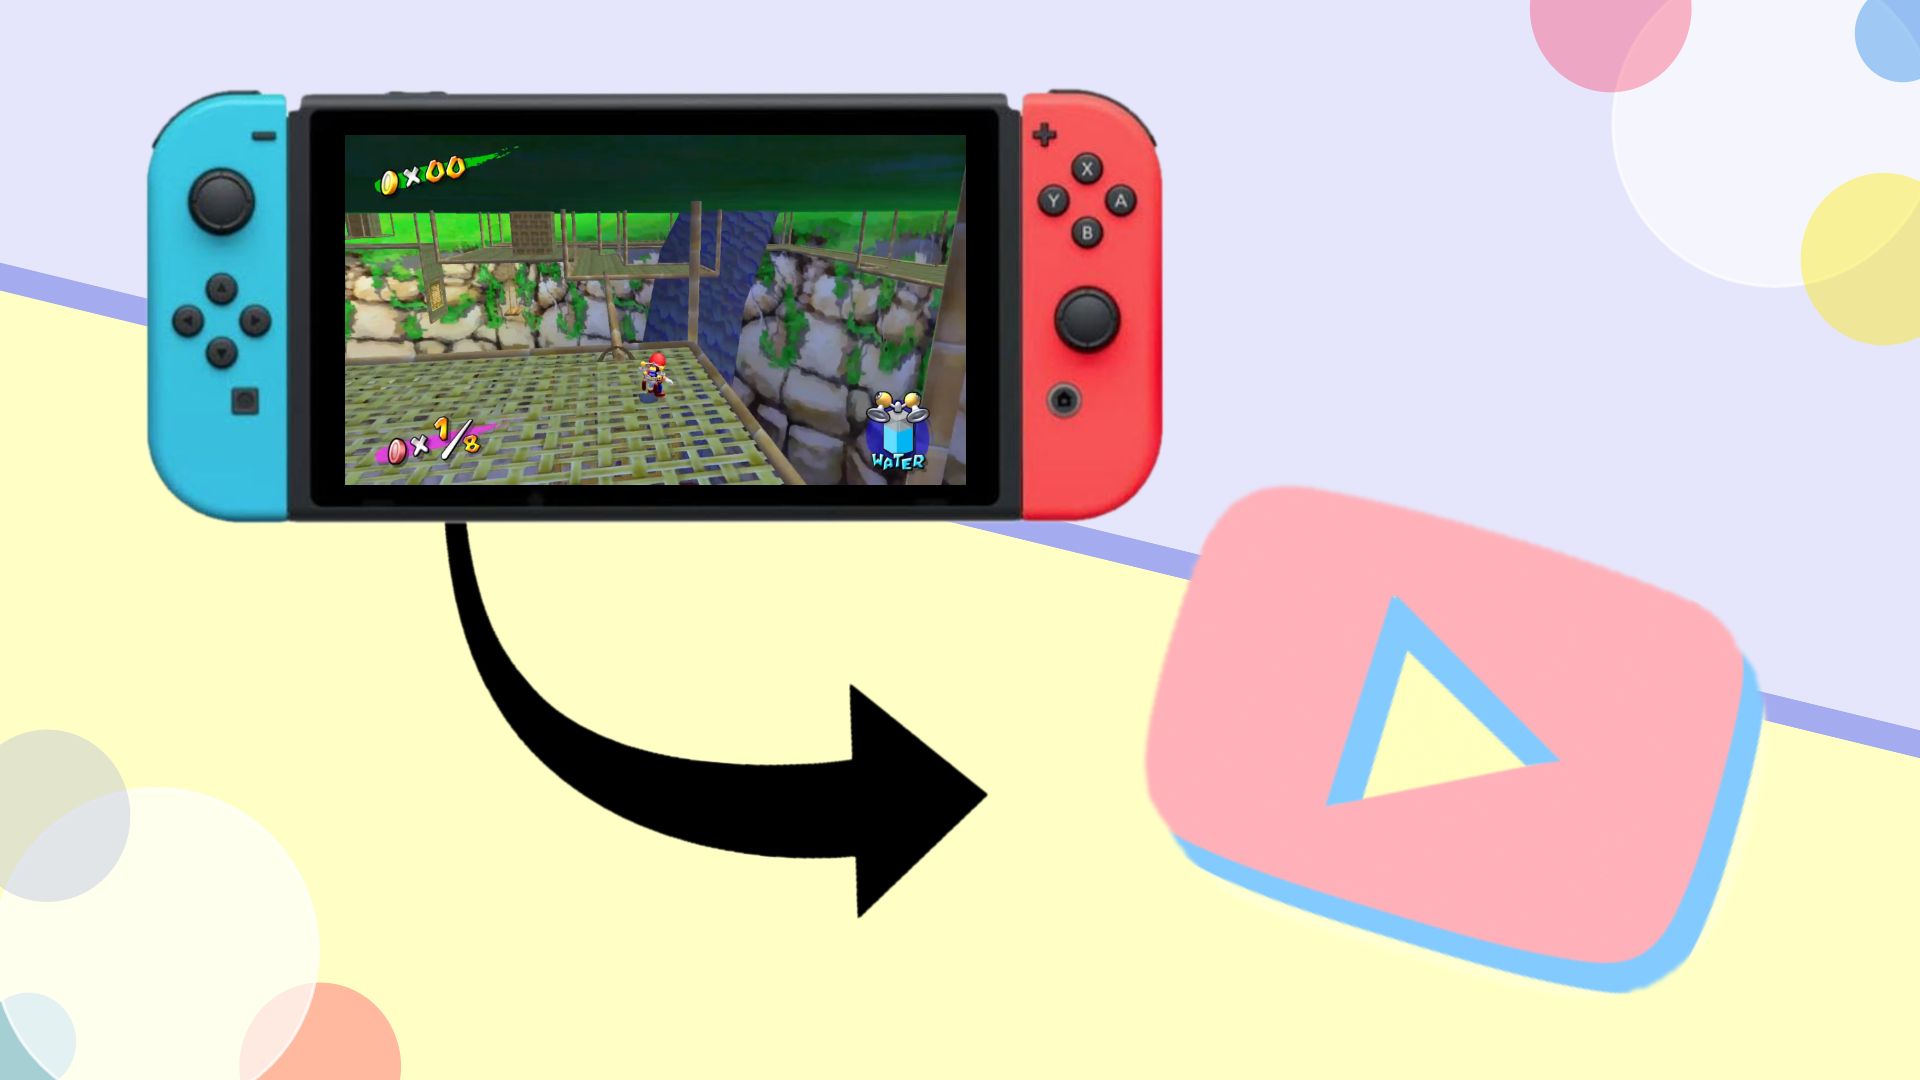 capture switch without capture card